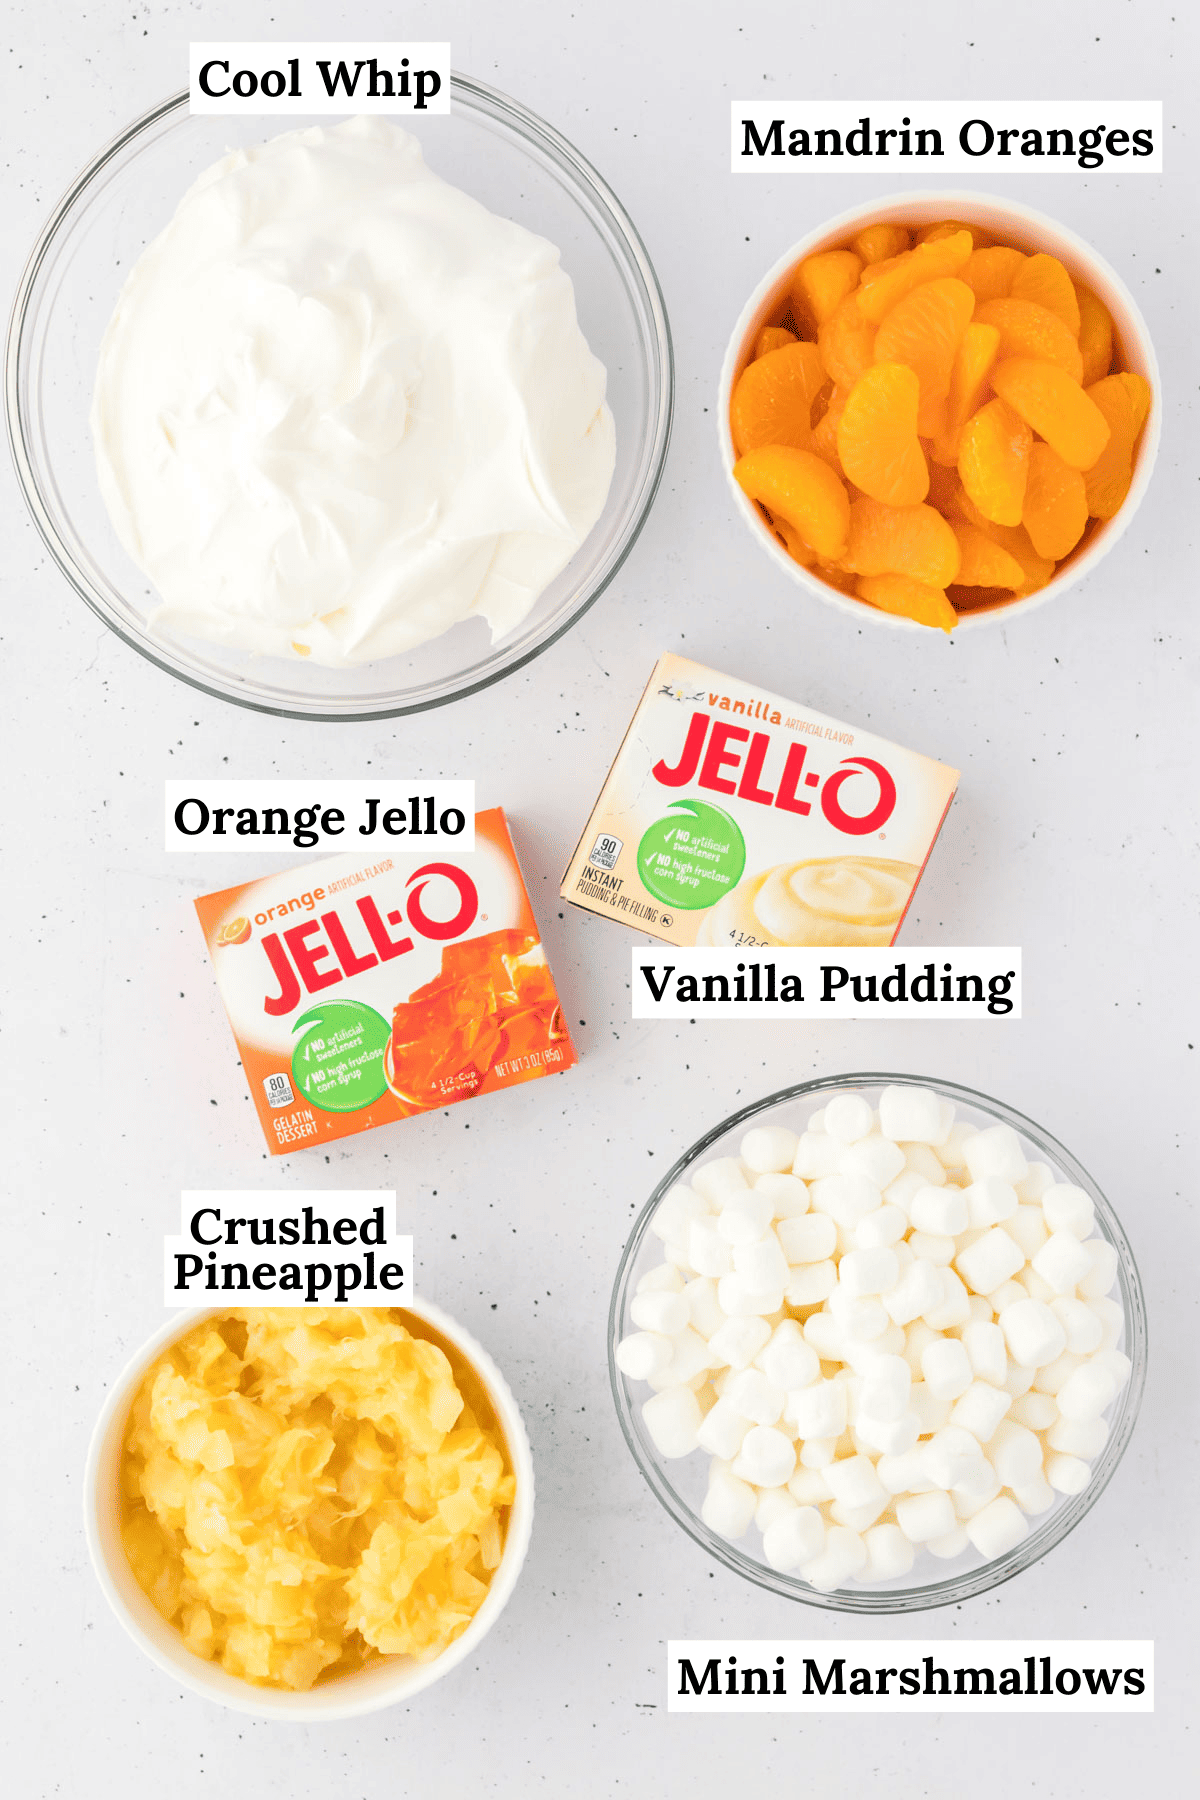 the ingredients for orange fluff salad layed out on a counter including orange jello mix, vanilla pudding mix, a bowl of mini marshmallows, a bowl of crushed pineapple, and a bowl of cool whip